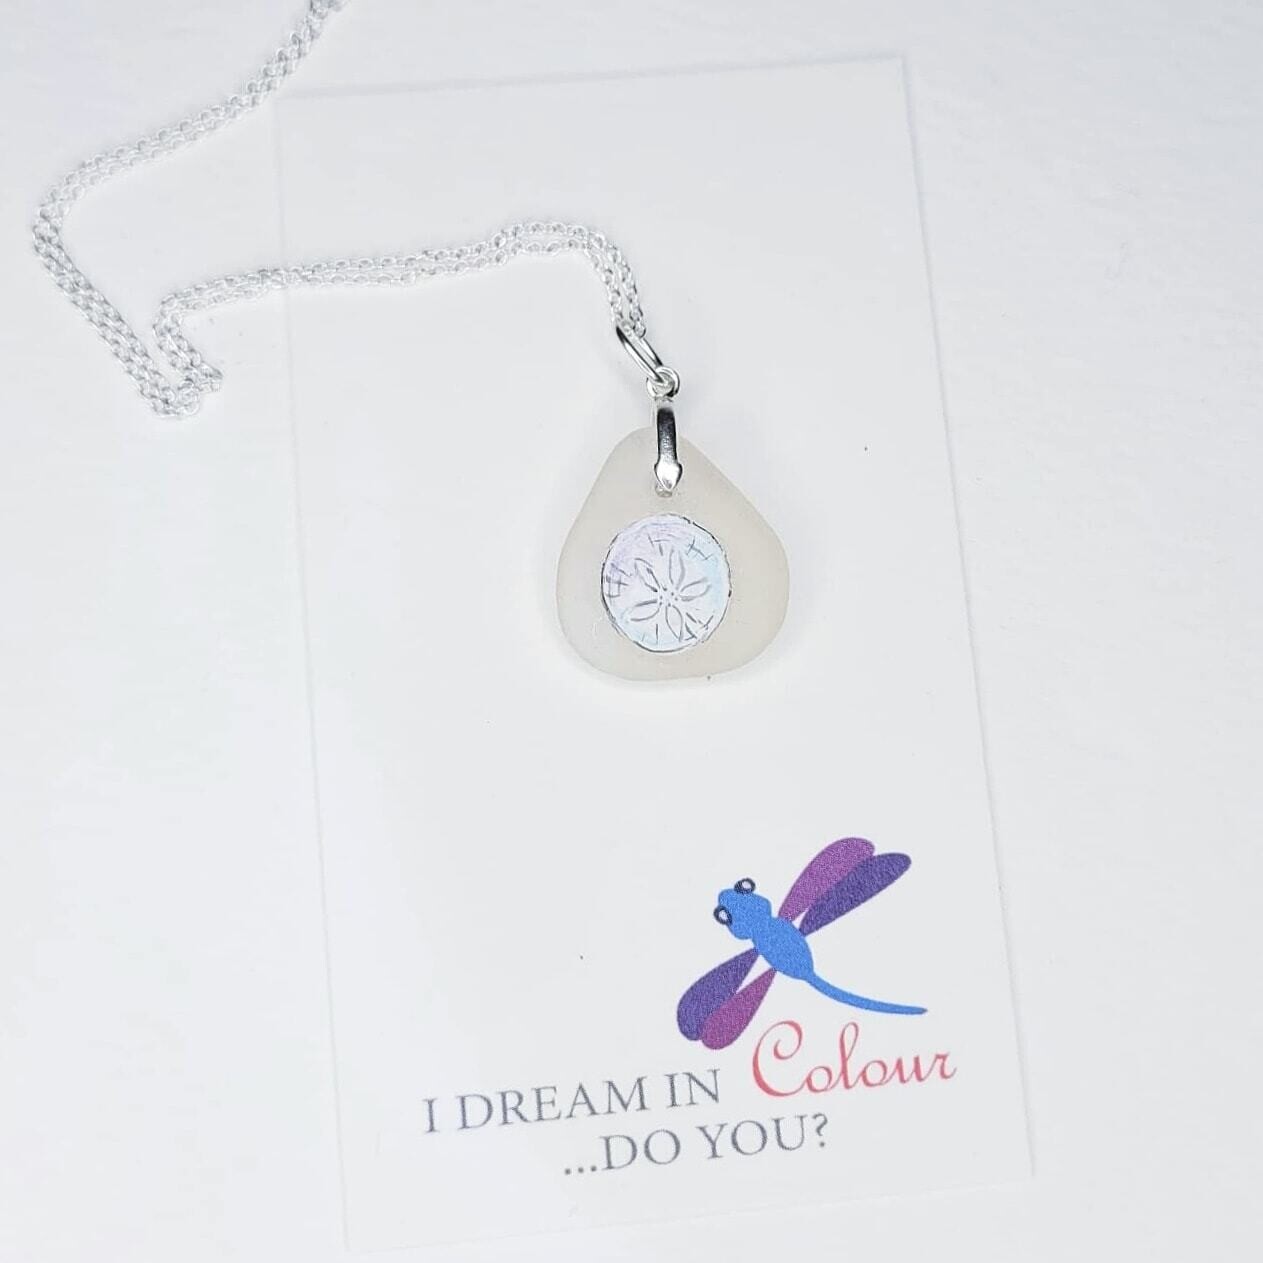 Painted Sand Dollar on Sea Glass Necklace- I Dream in Colour